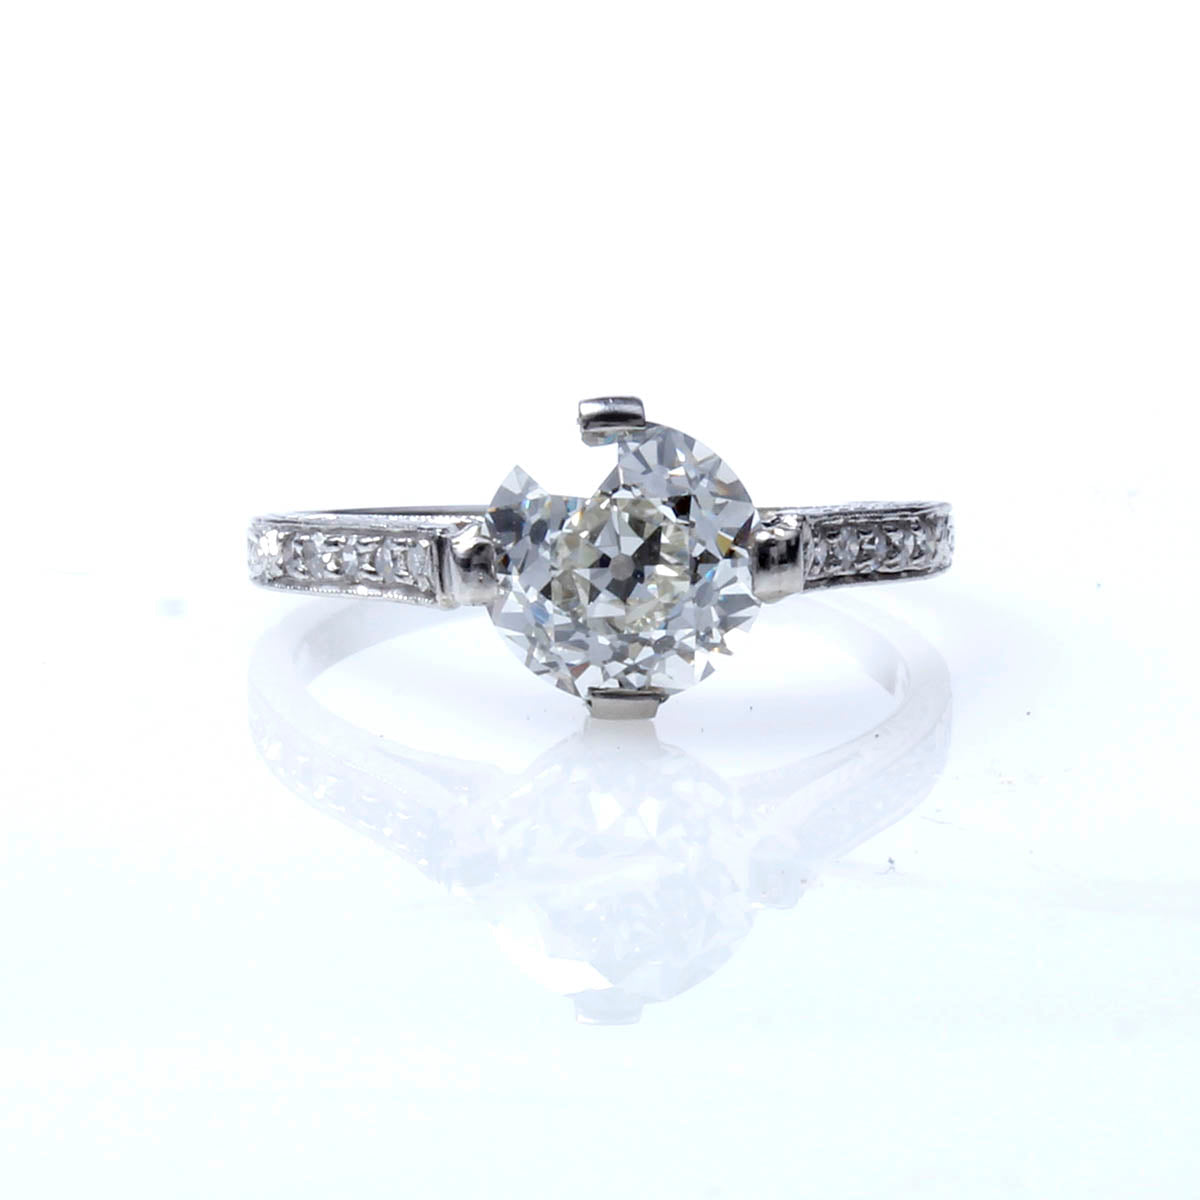 Early Art Deco Engagement Ring #VR191108-1-1